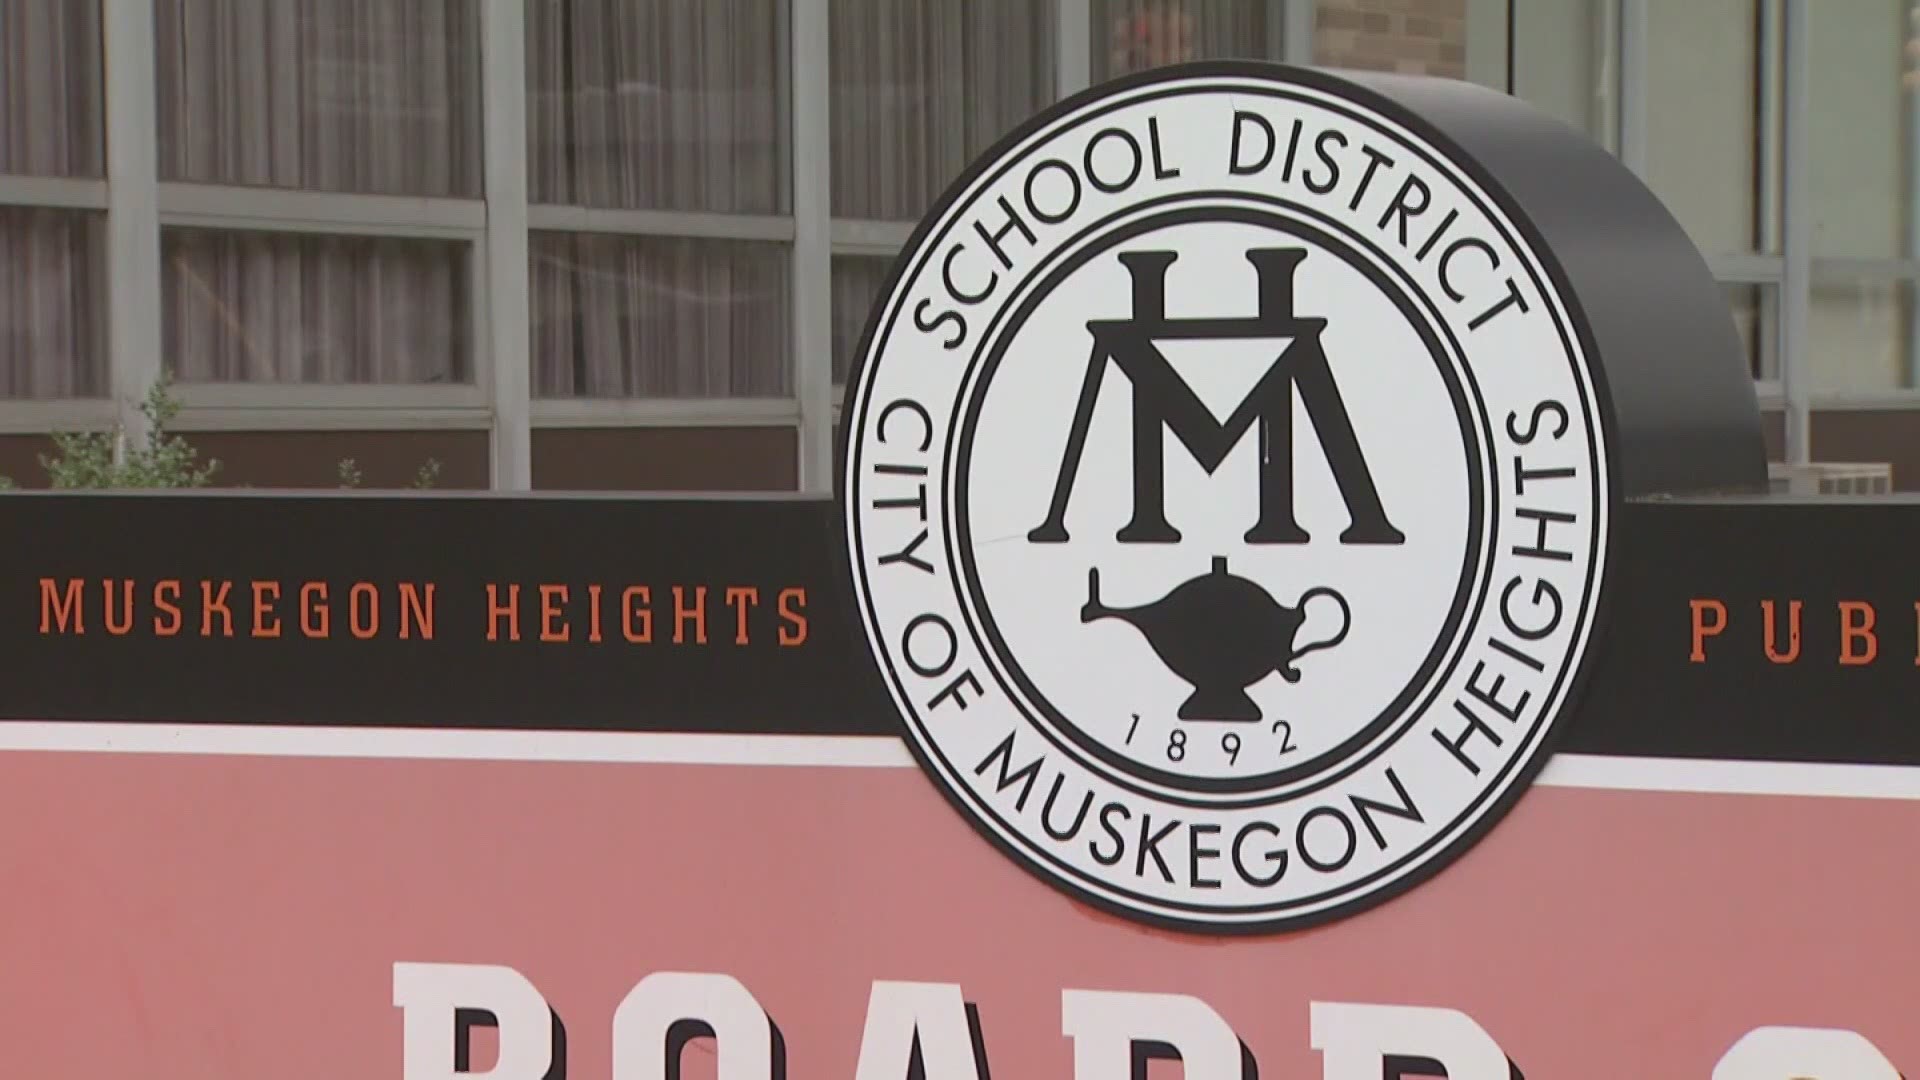 Effective immediately, the Muskegon Heights Public School district will regain local control without state oversight.